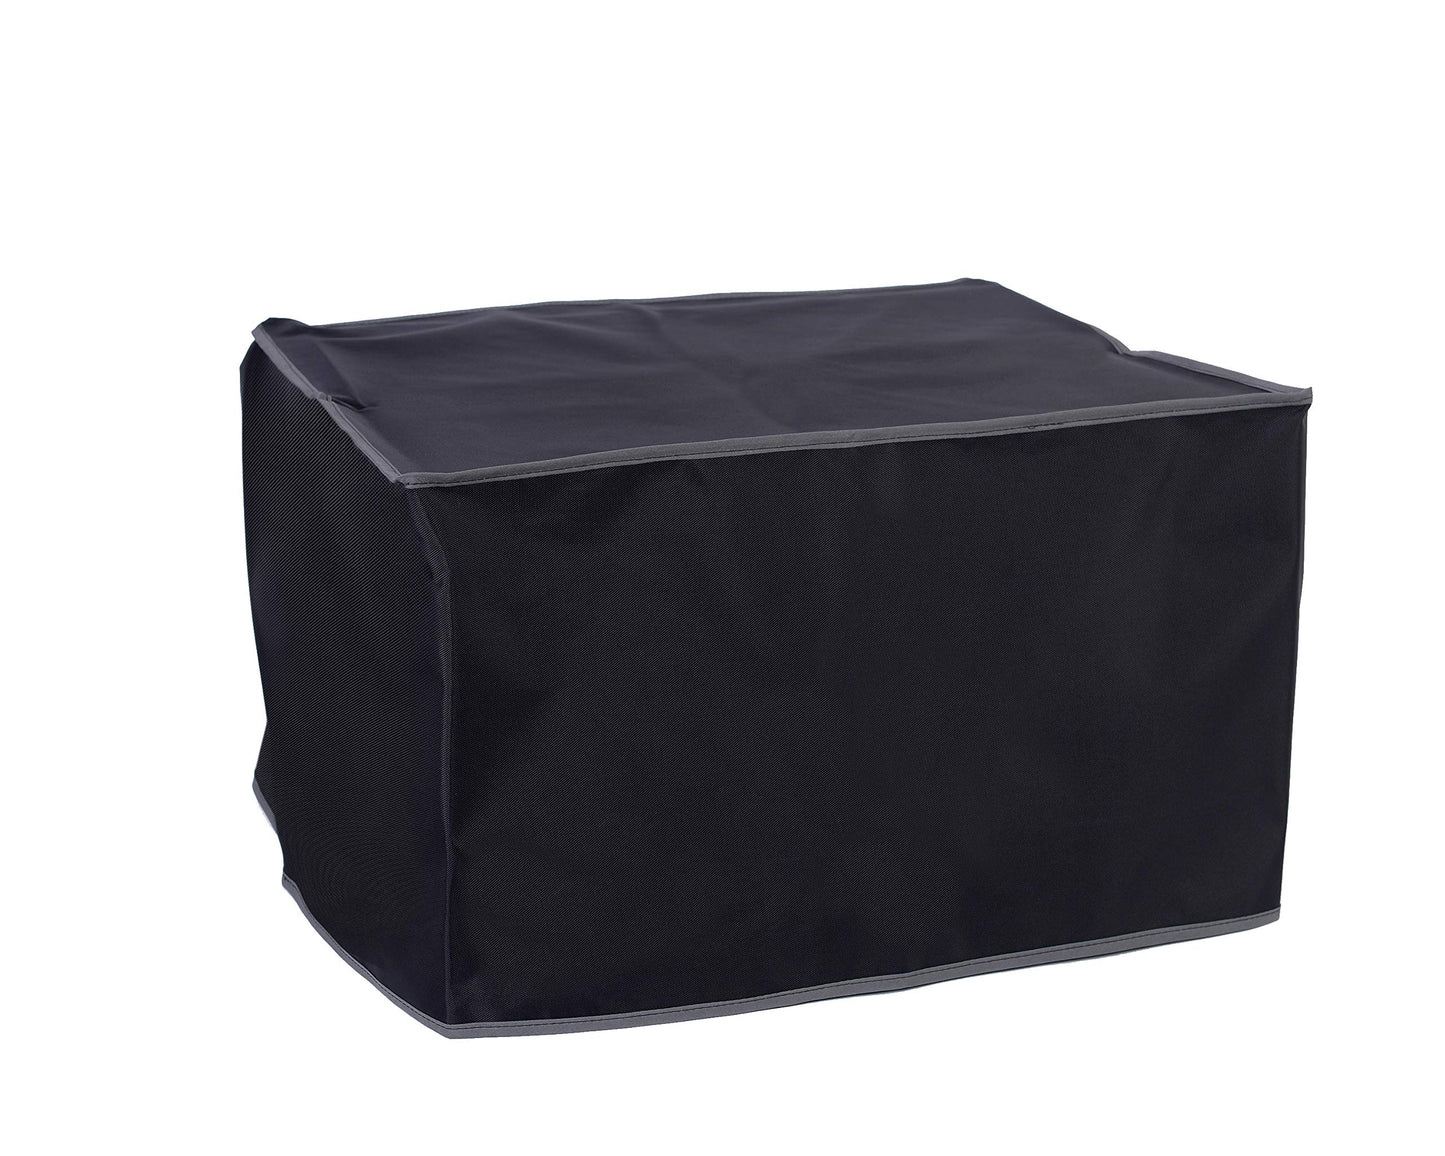 The Perfect Dust Cover, Black Nylon Cover for HP Latex 315 54-in Wide Format Inkjet Printer, Anti Static Waterproof Cover, Dimensions 91''W x 33''D x 54''H by The Perfect Dust Cover LLC